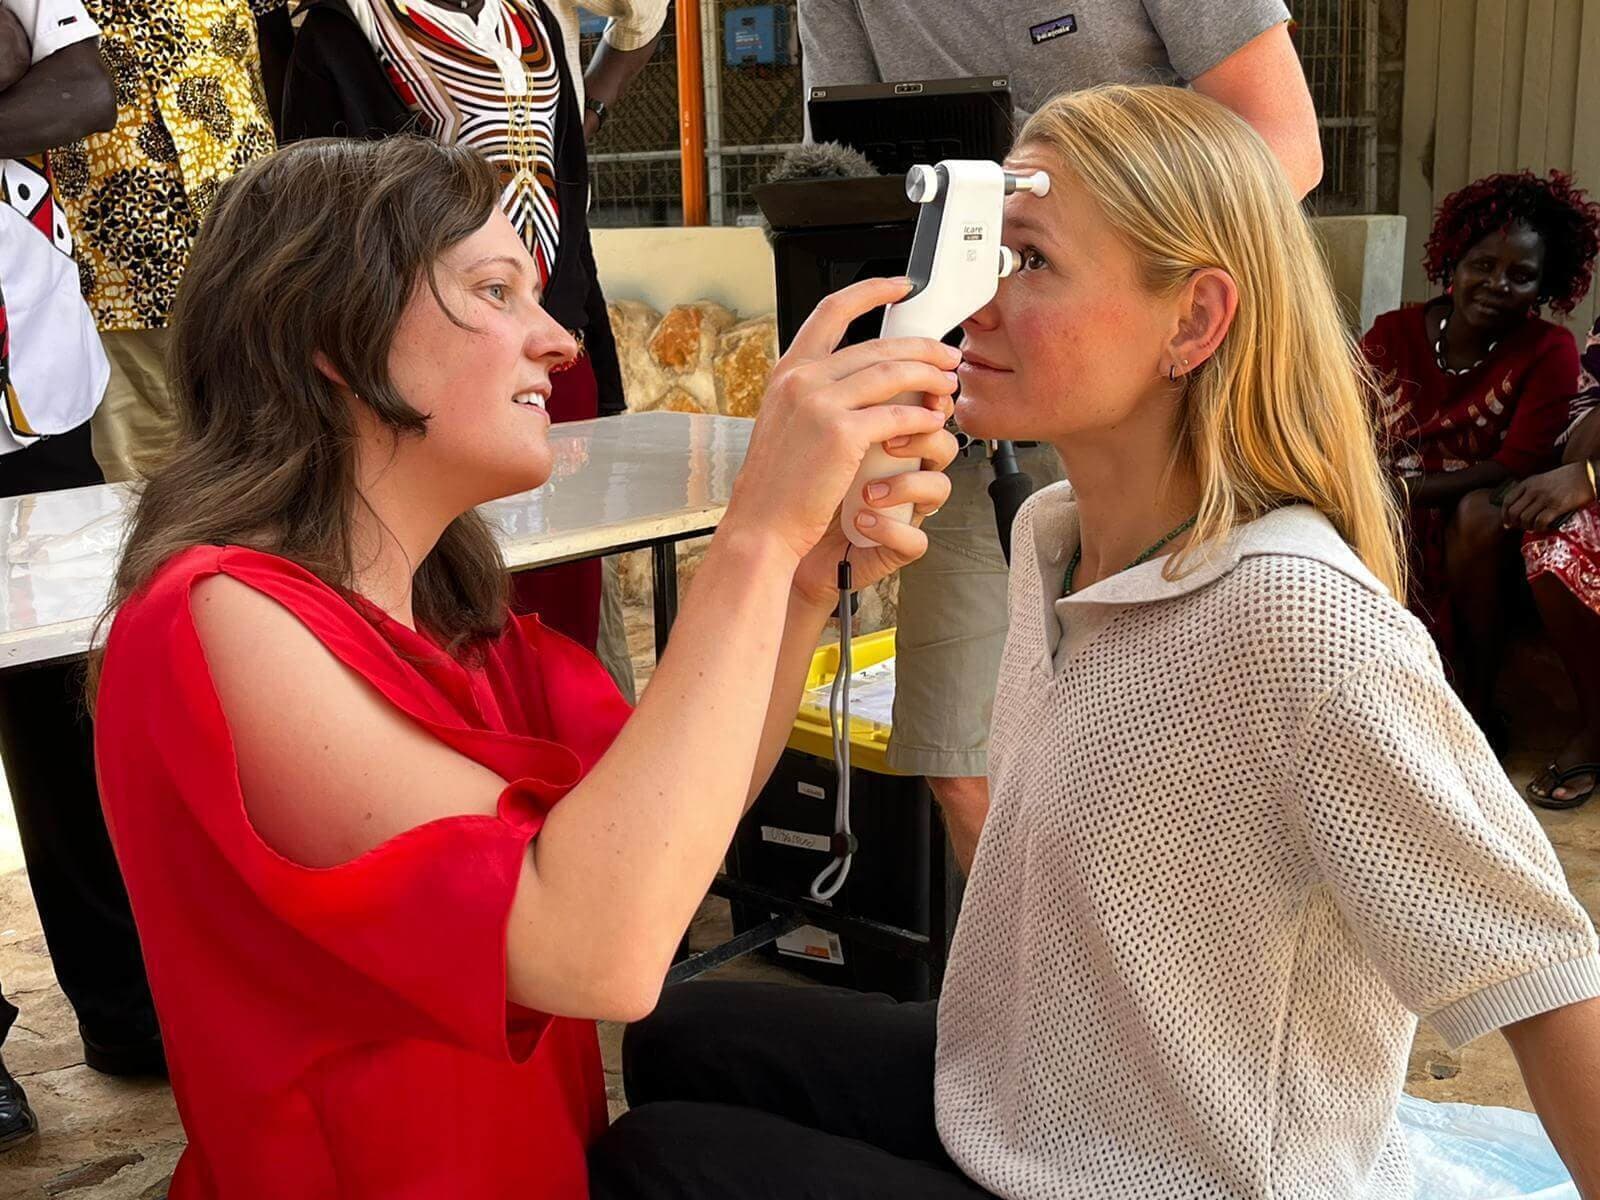 A woman with brown hair in a red top holds a device looking in the eye of a blonde woman in a white top